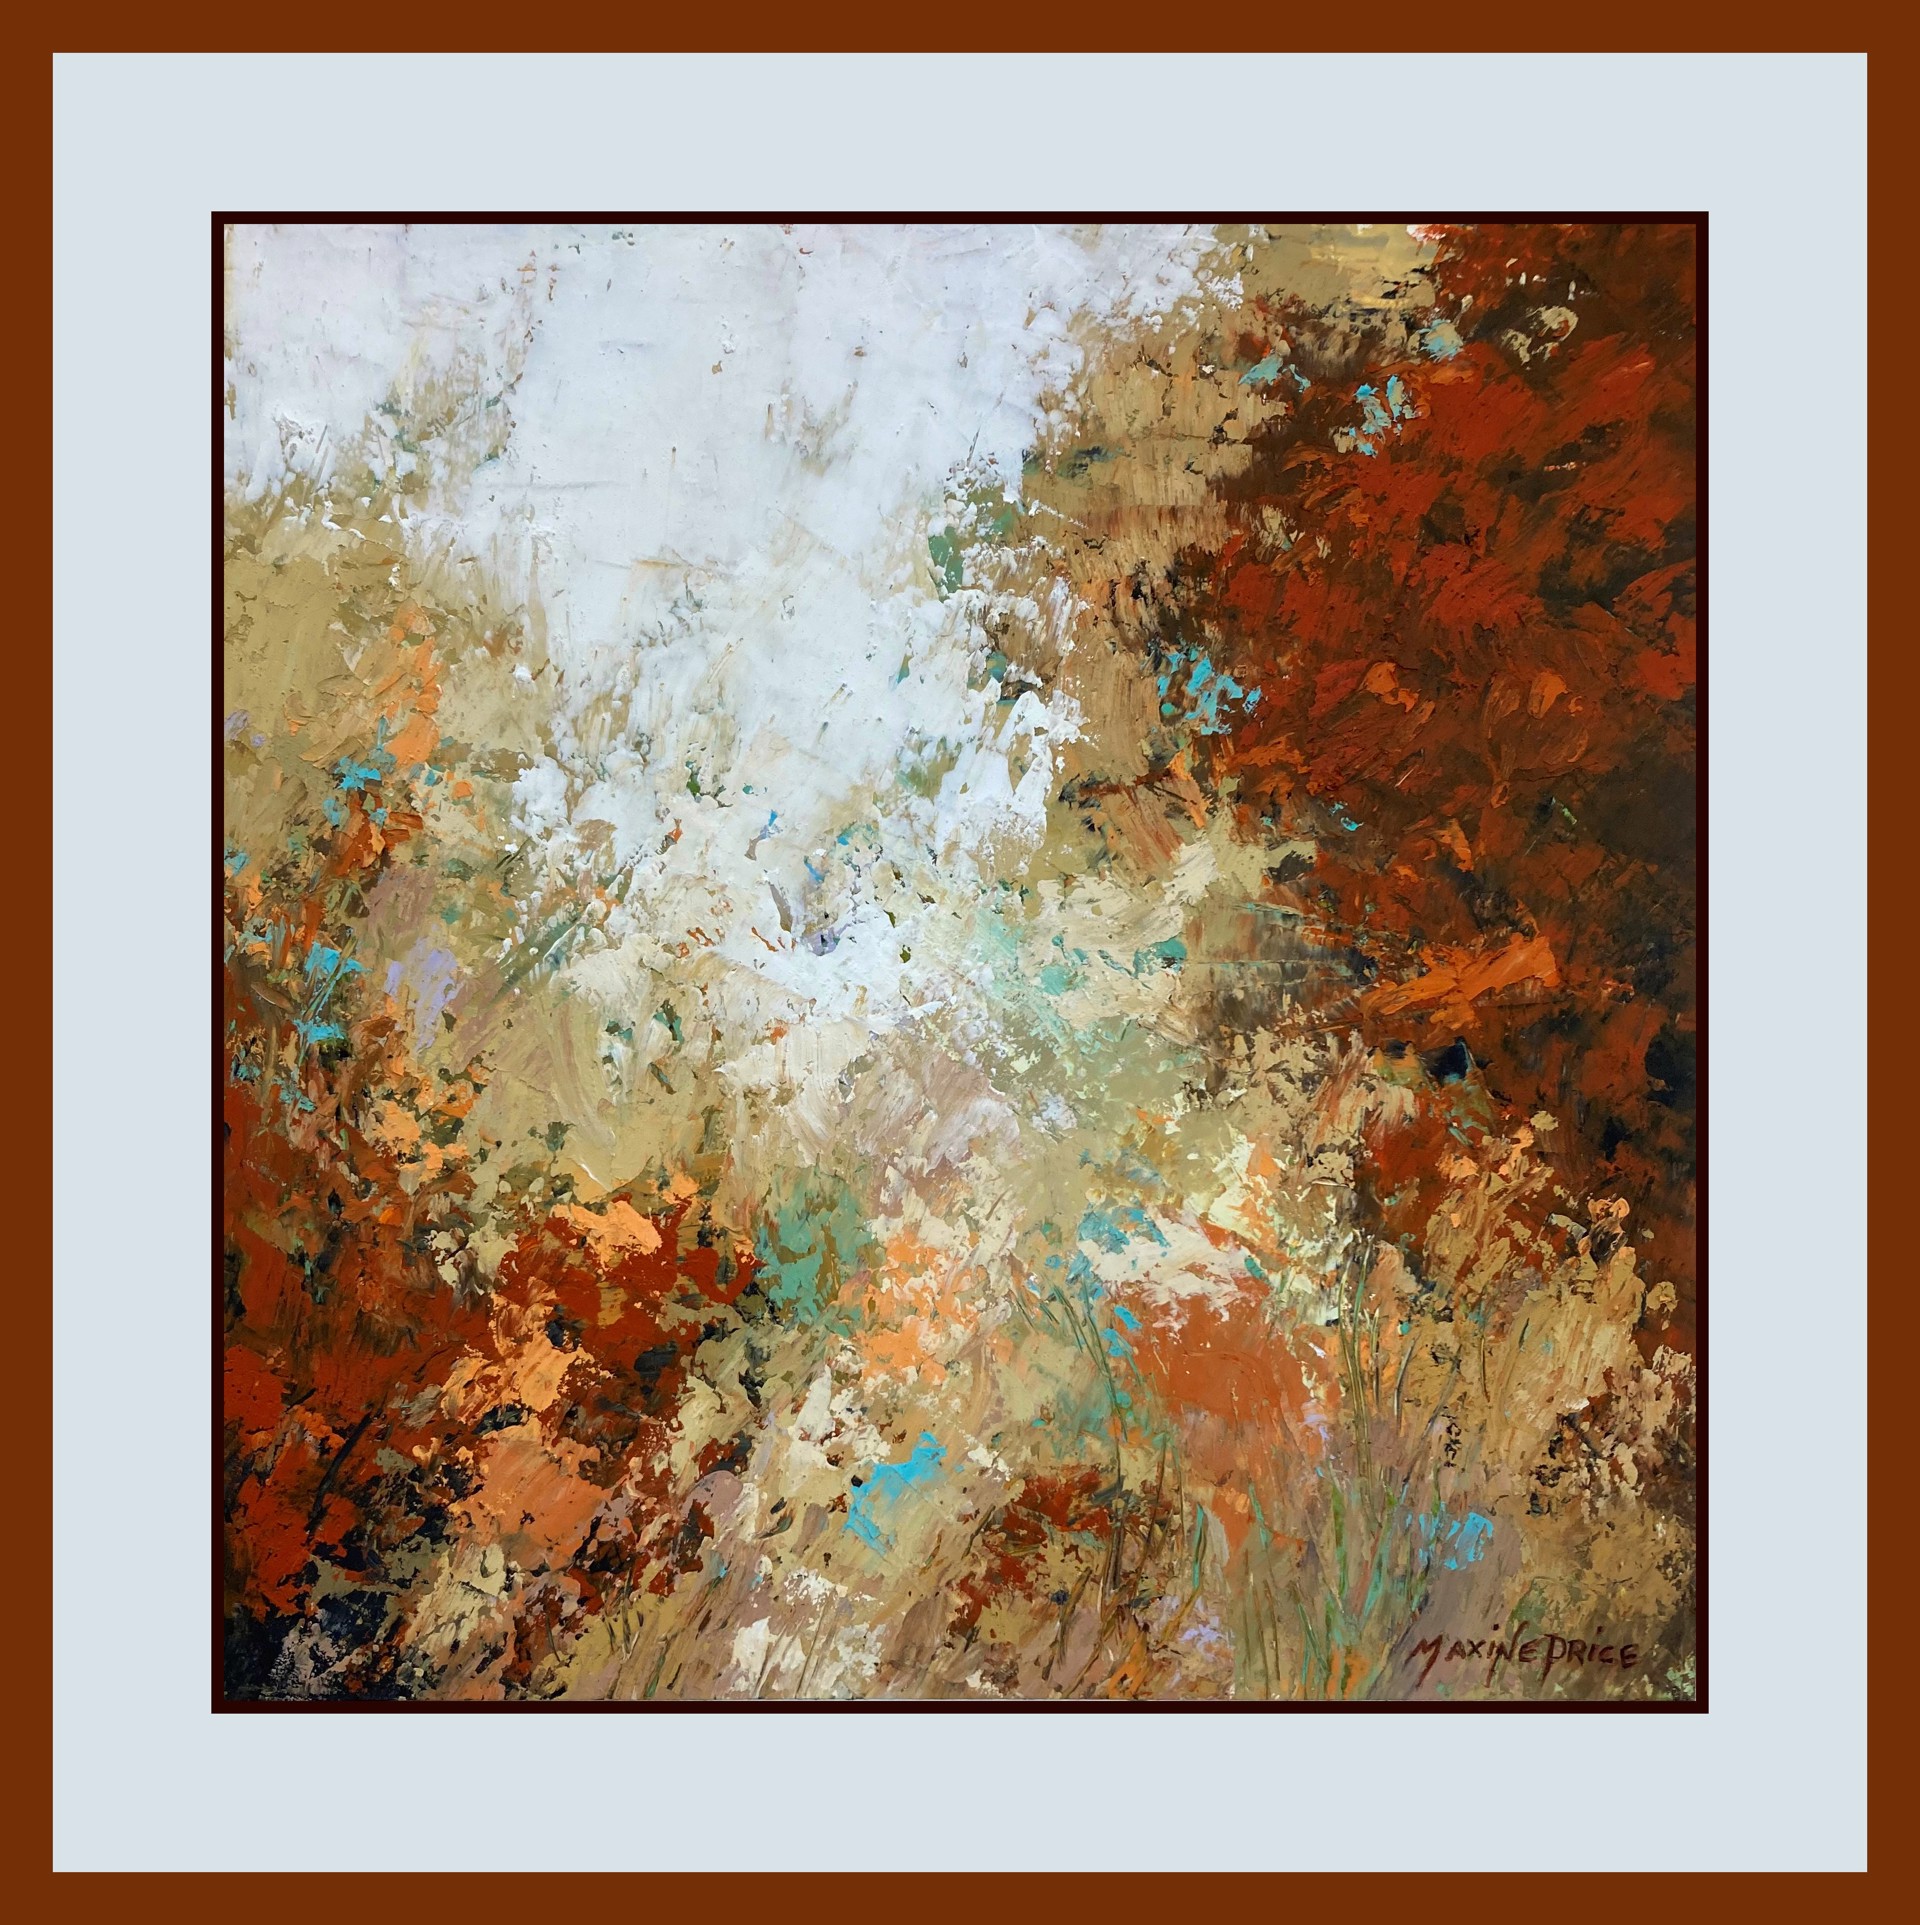 Fall in the Garden #1 by Maxine Price